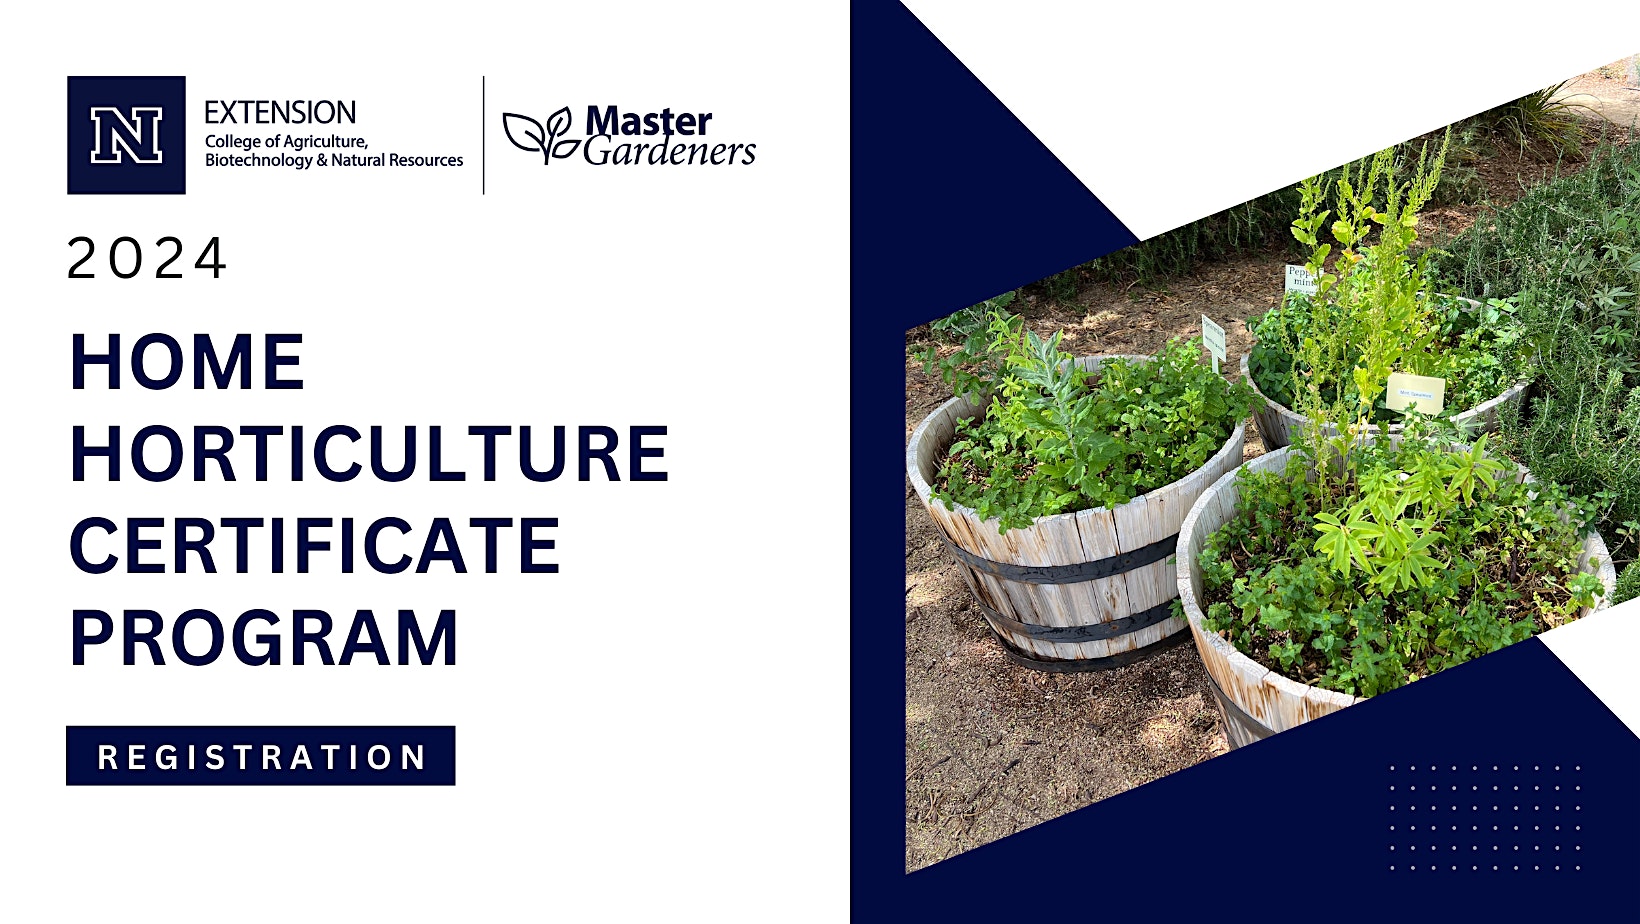 Home Horticulture Certificate Program 2024 (Statewide)